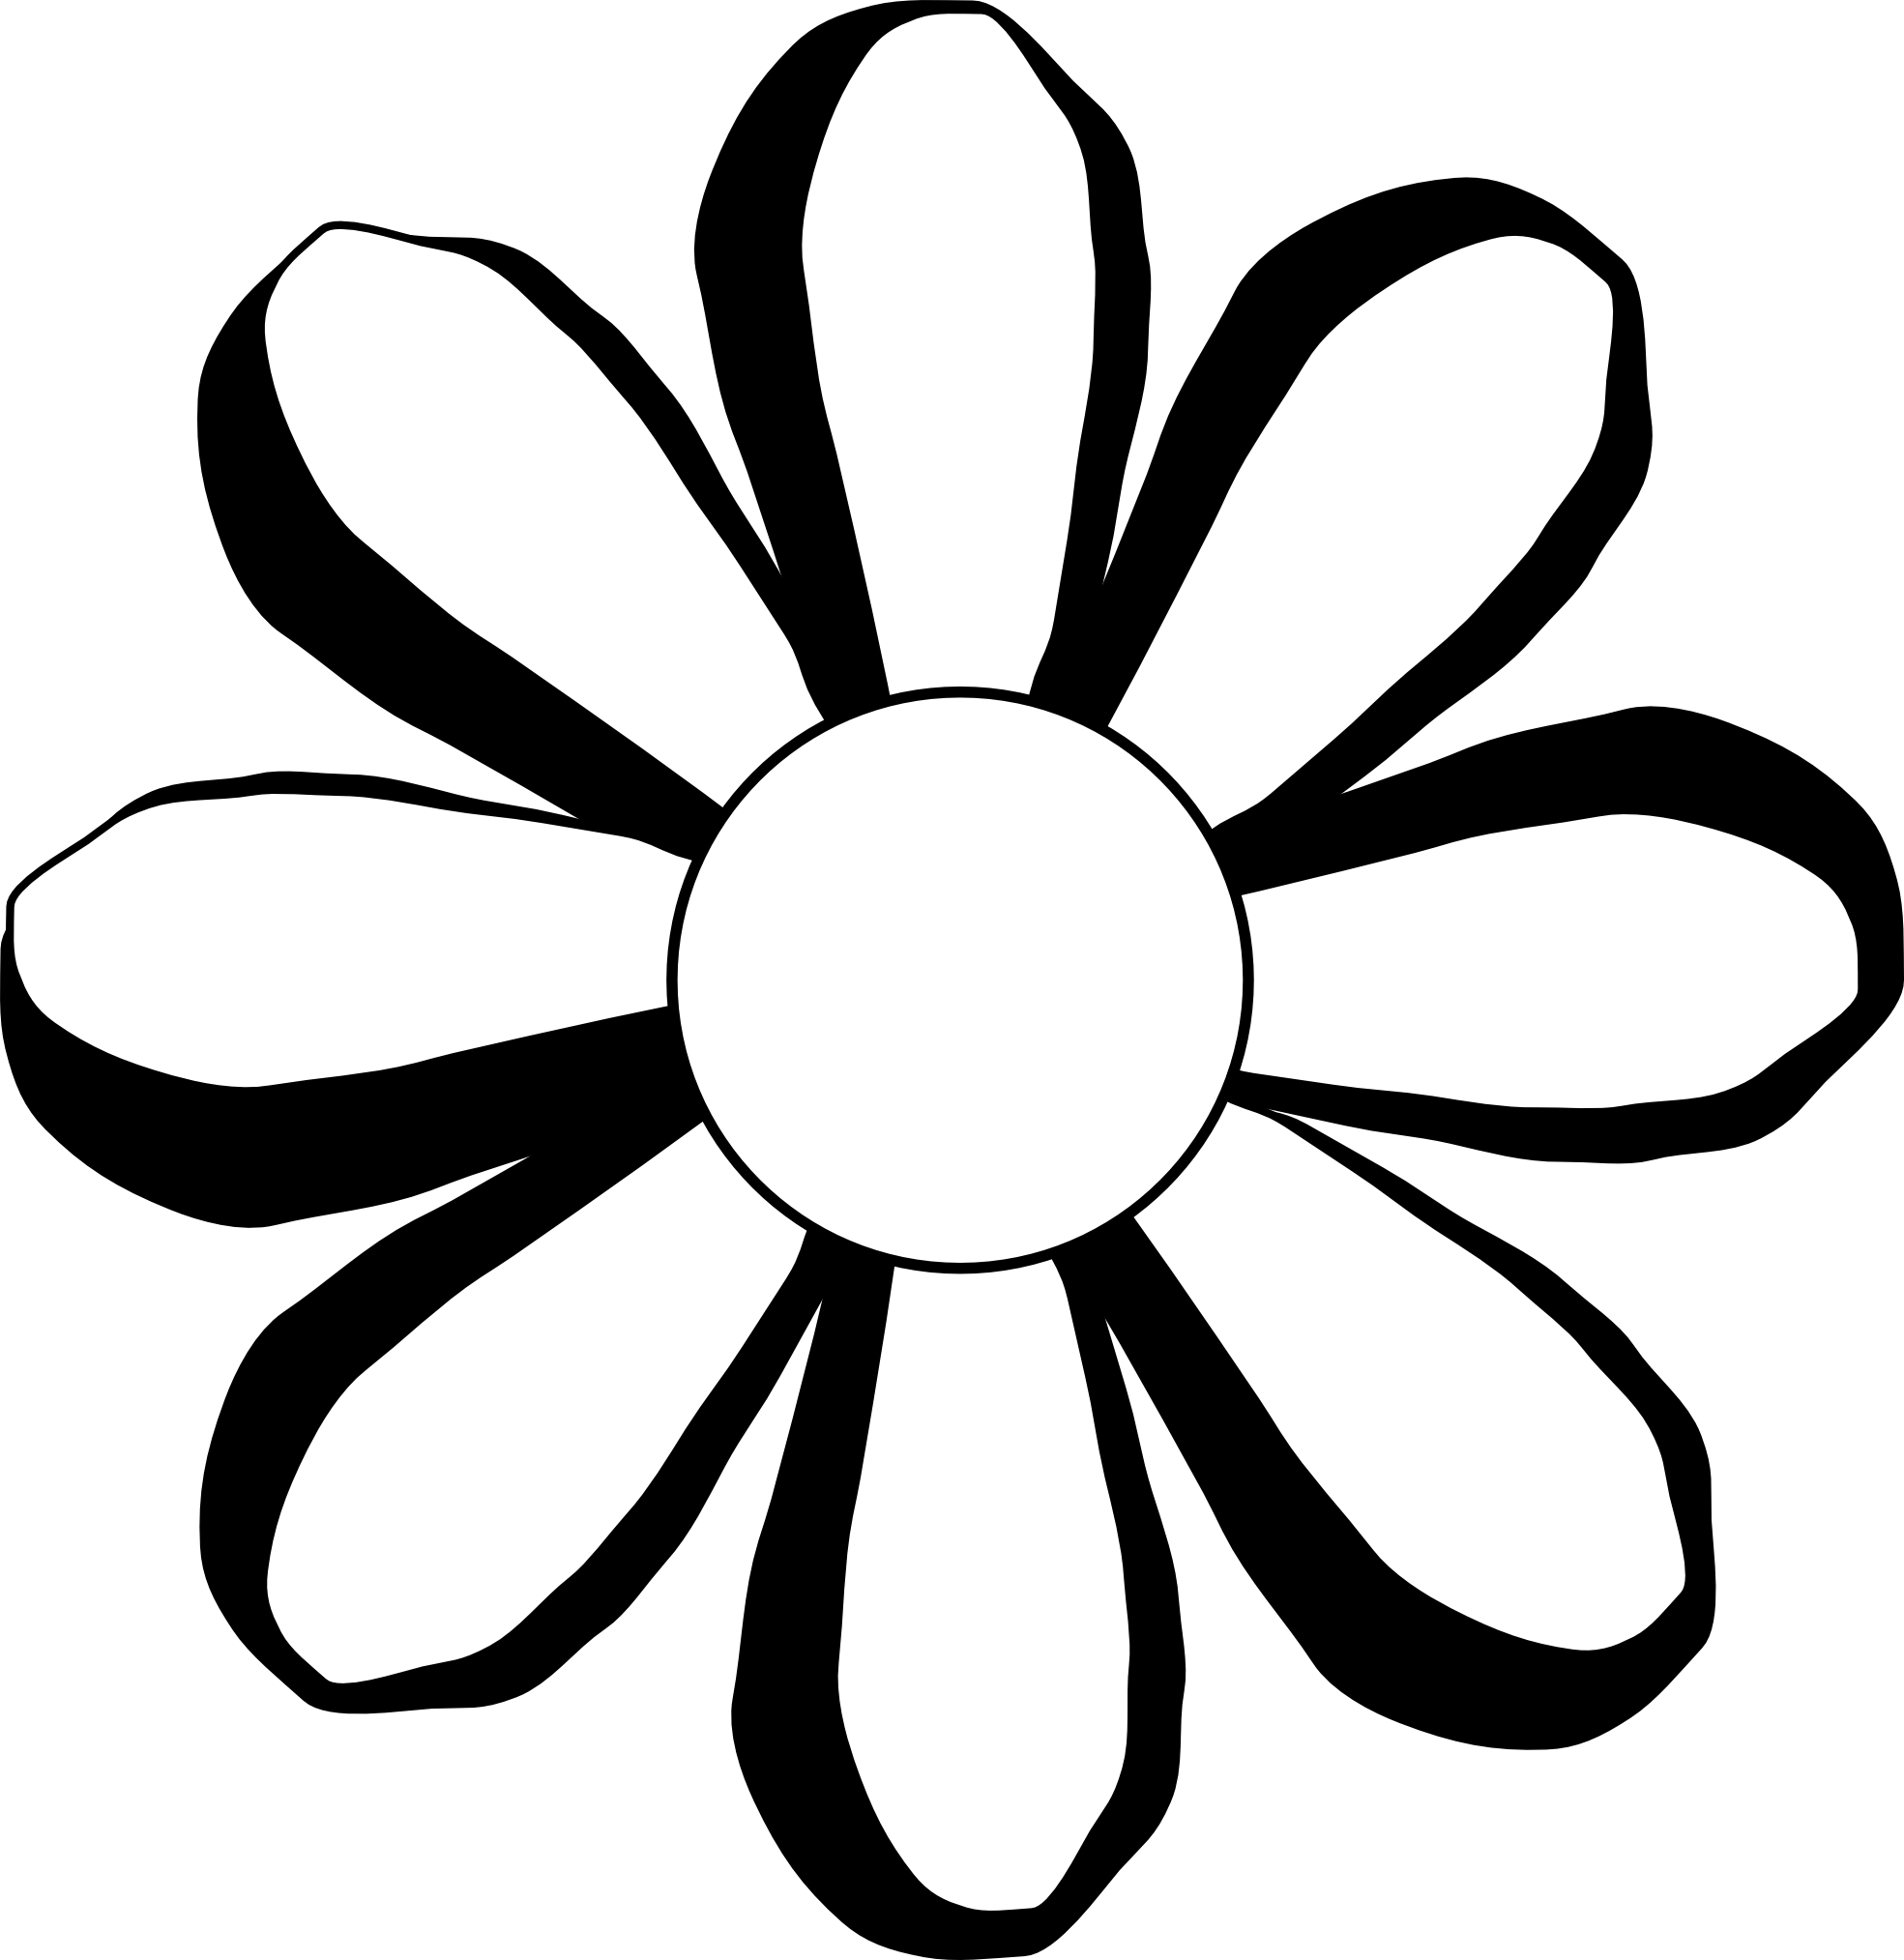 Black And White Flower Design Clipart | Free download on ...